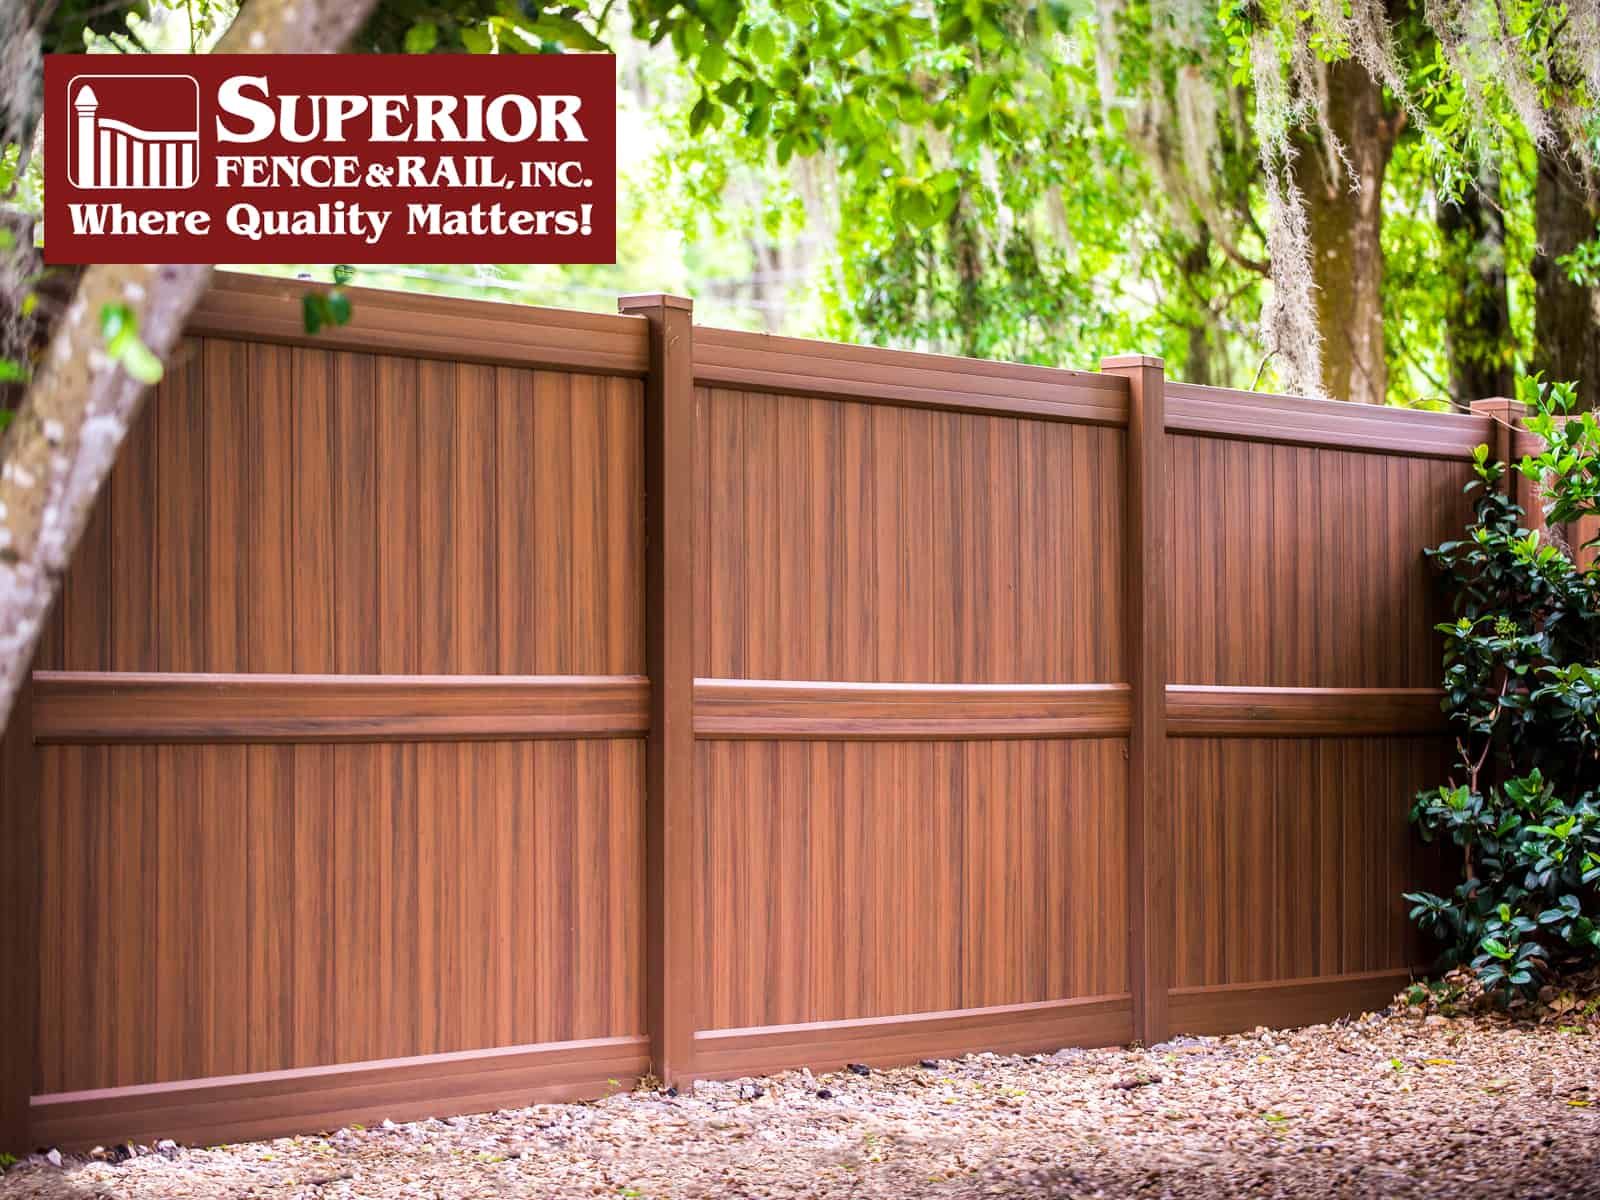 Rome Fence Company Contractor